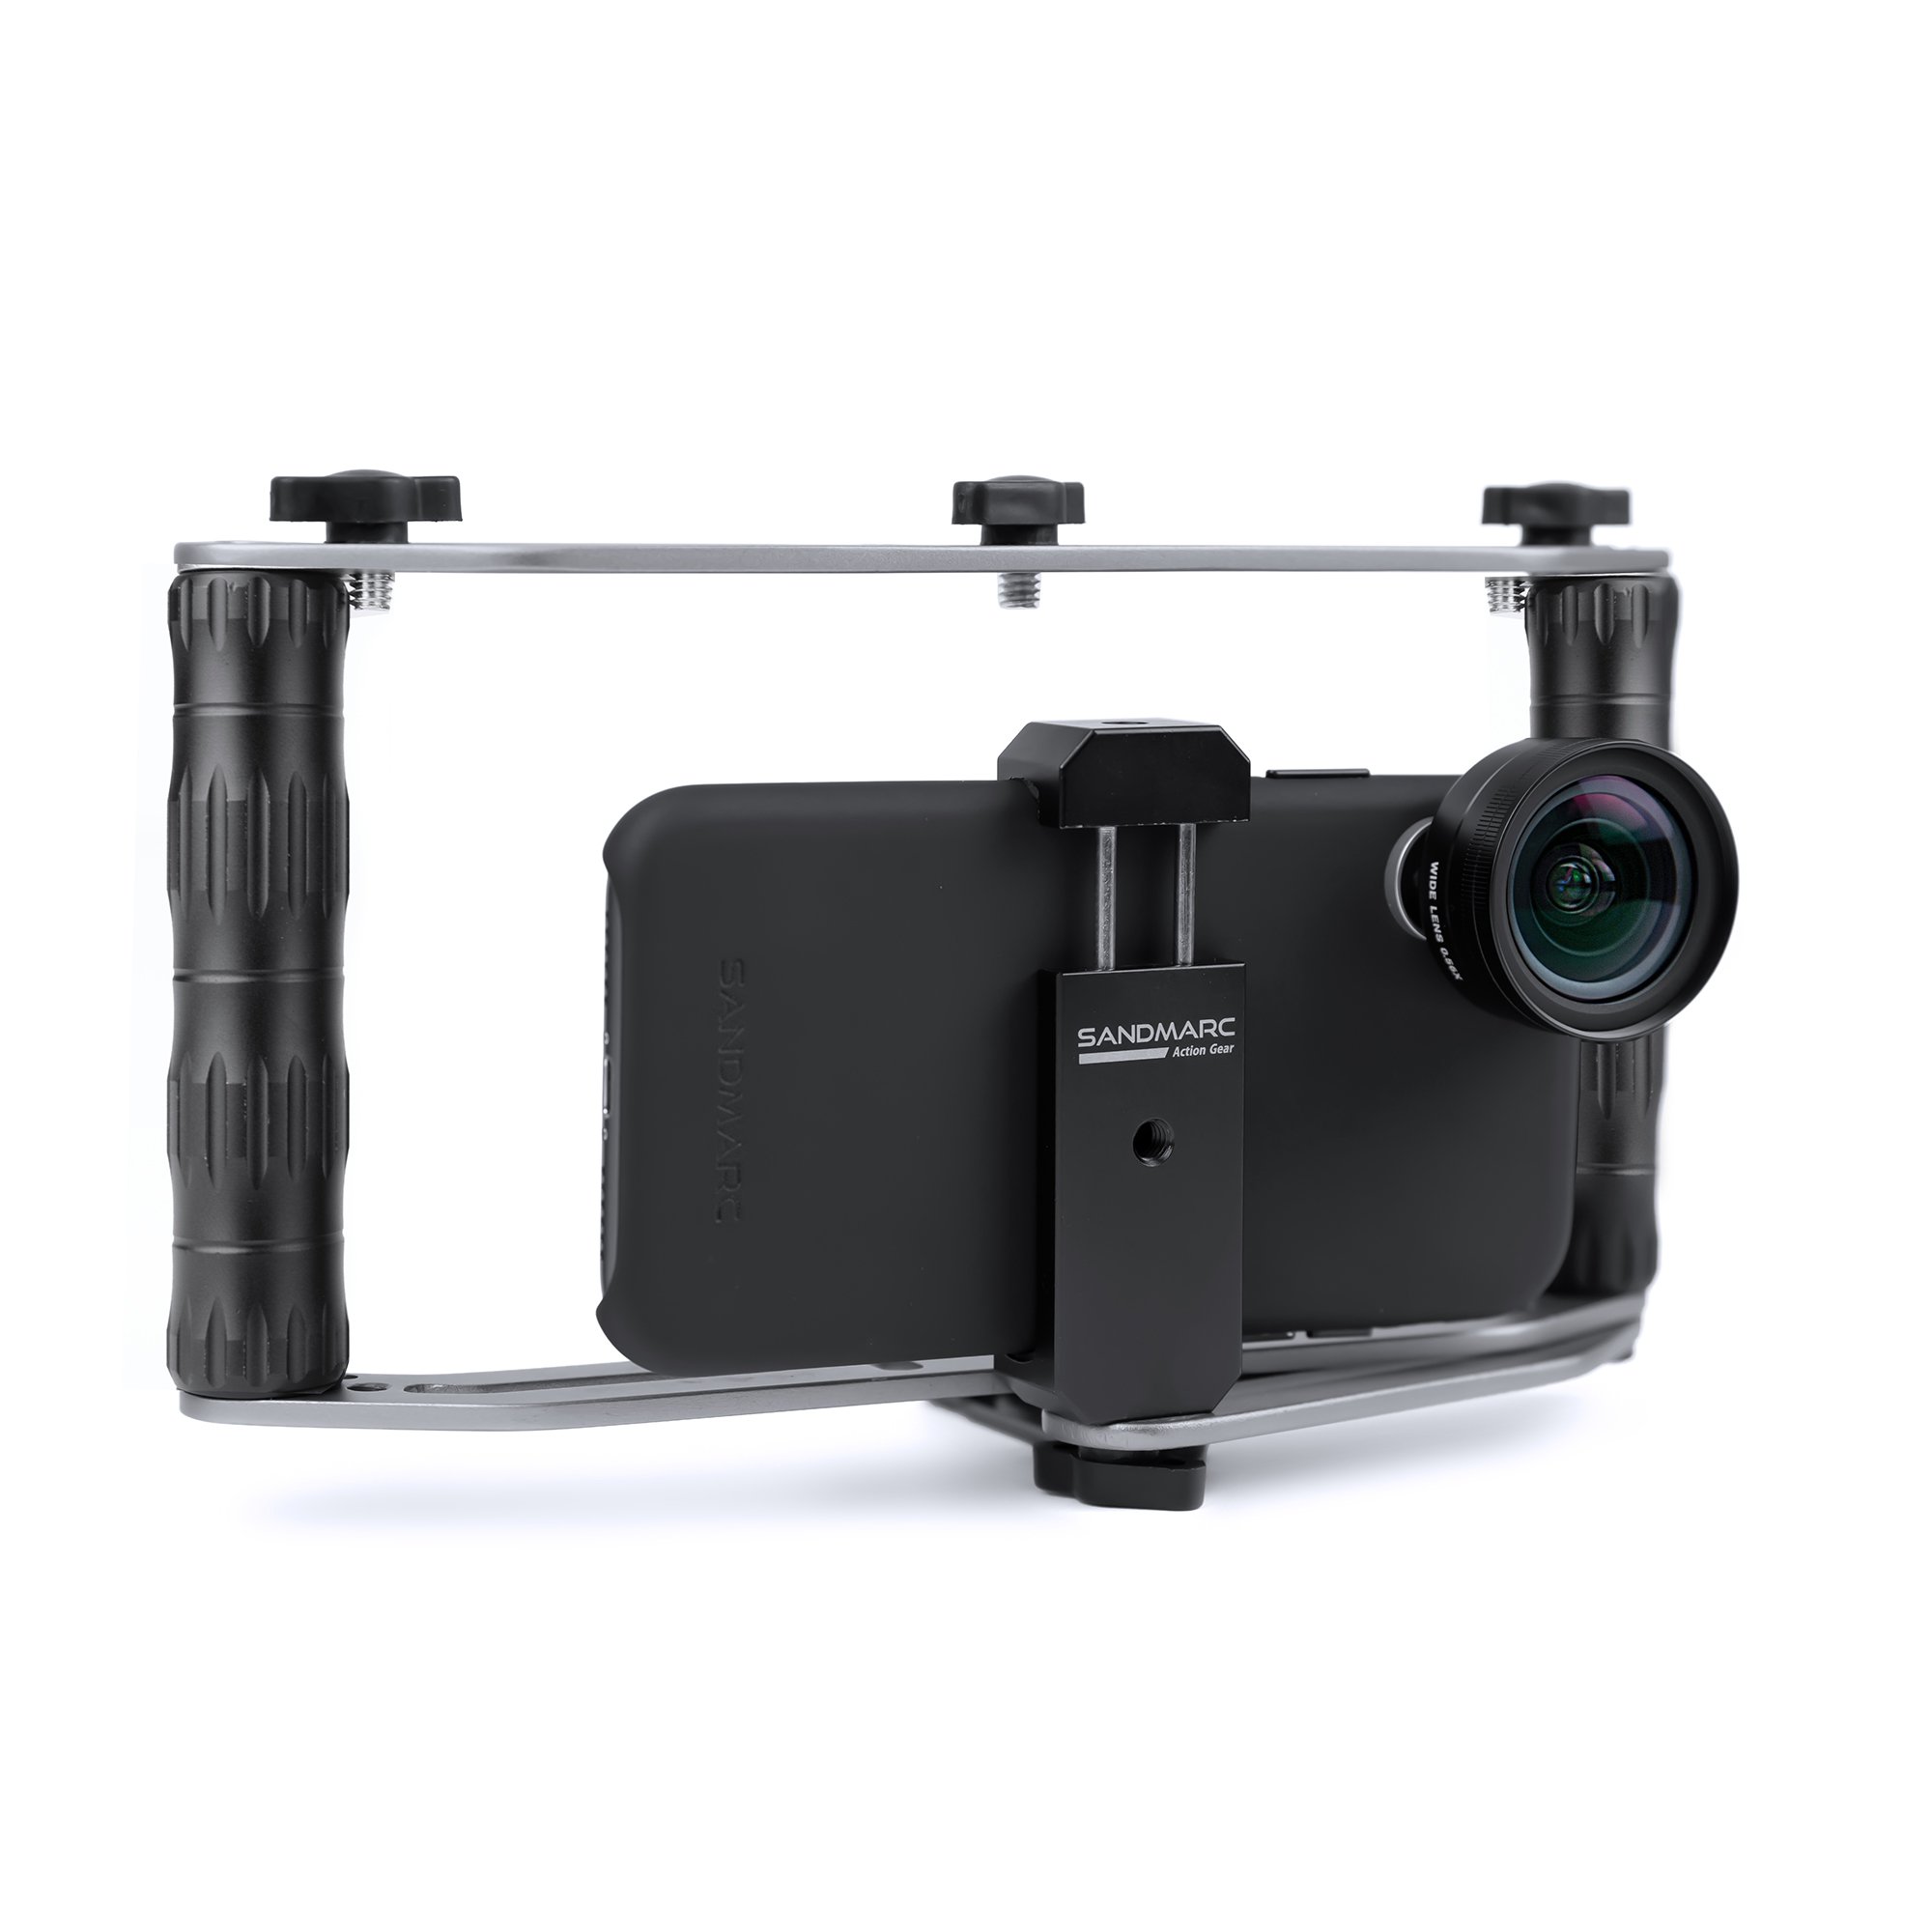 Smartphone Stabilizer Rig Video Camera Cage Film Steady for iPhone LG  Samsung